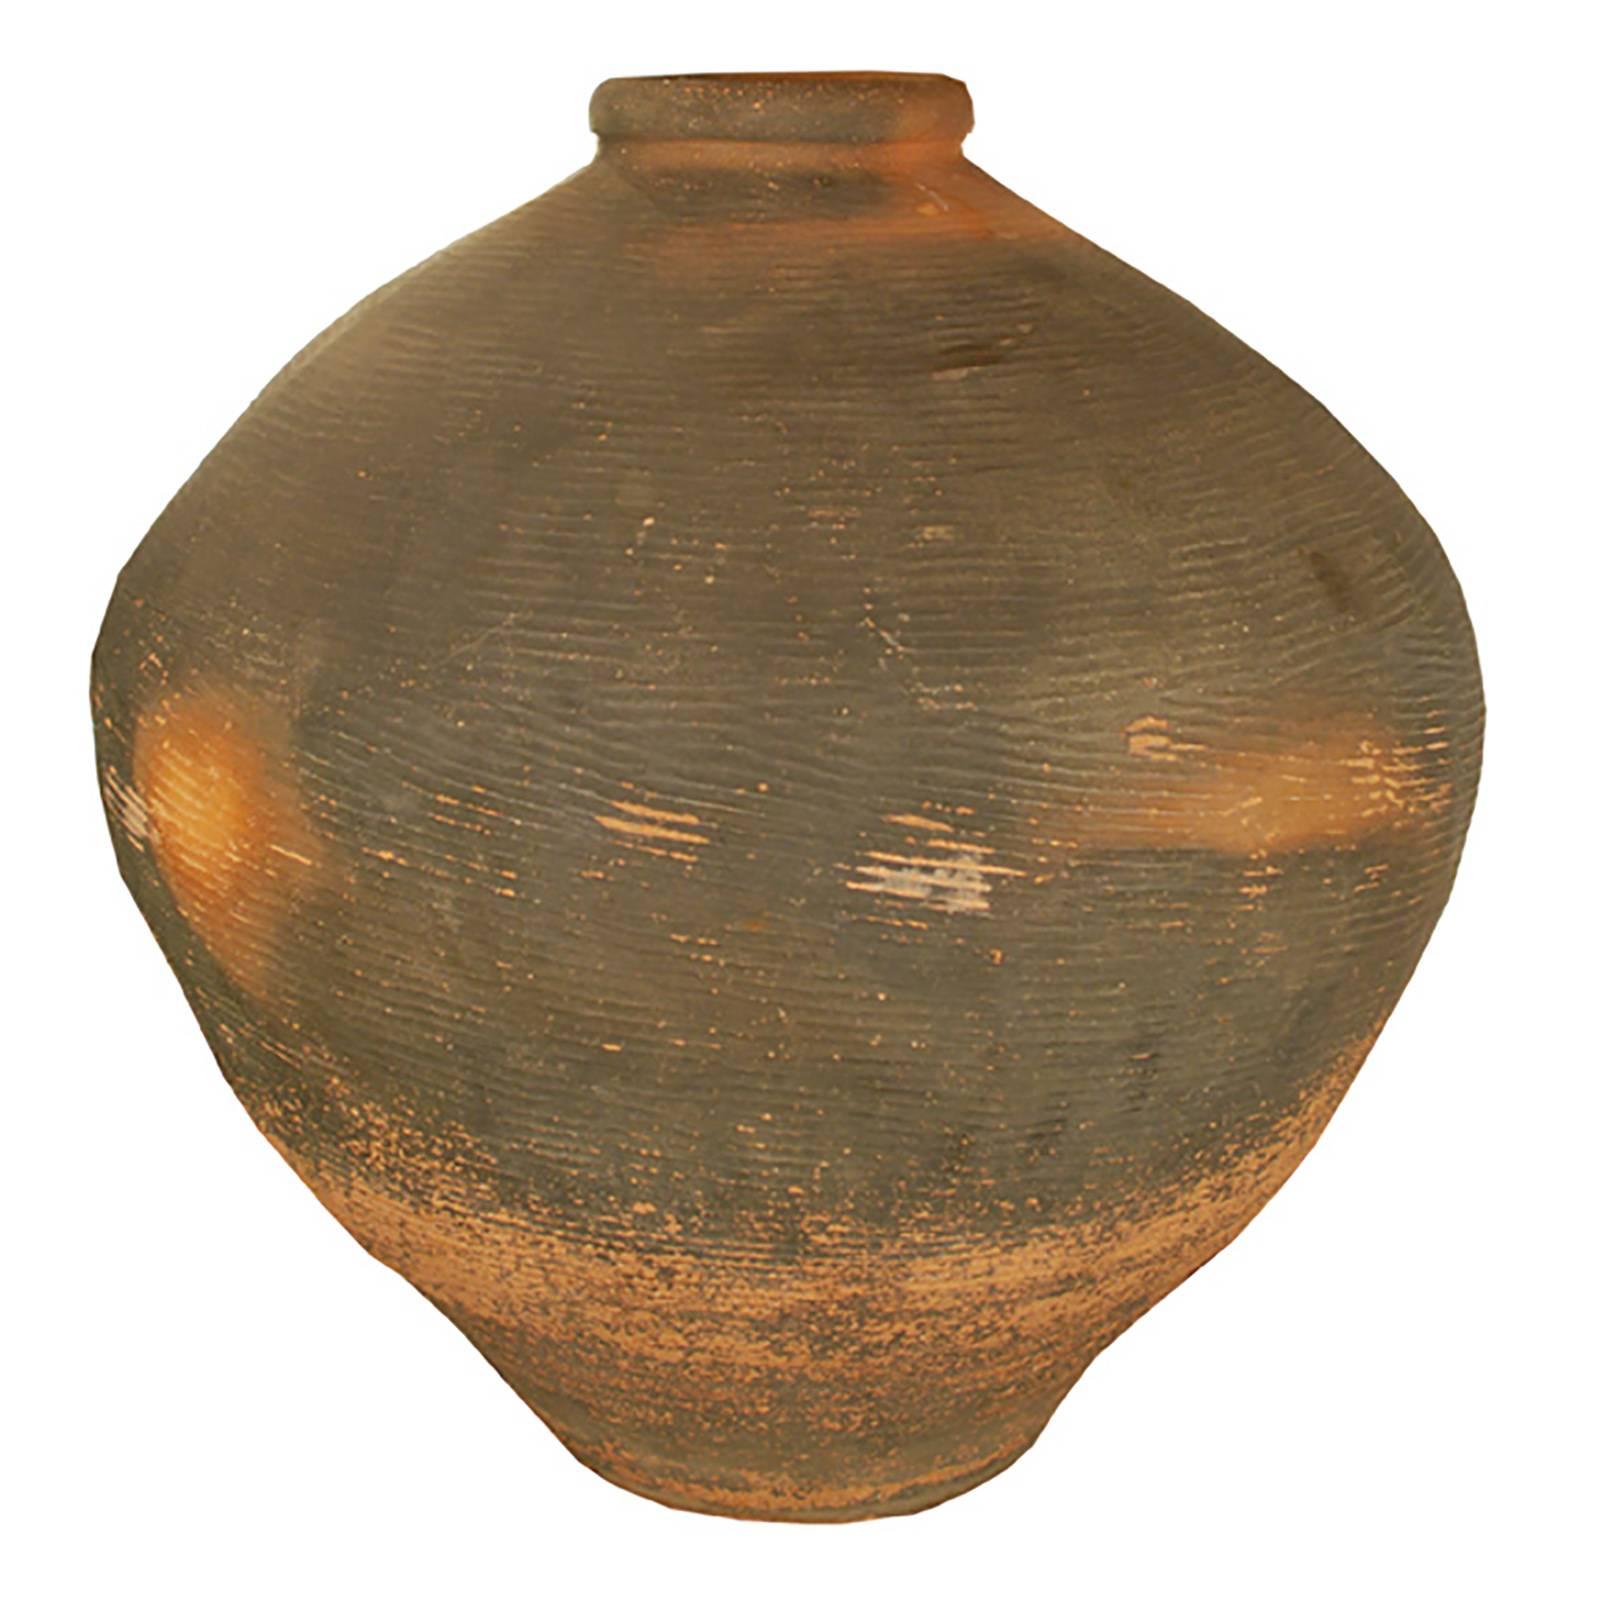 Shaped according to millennia-old prototypes fired in the Bronze Age, this handmade ceramic jar from northern China once stored wine and spirits made from rice and grains. Stunning in the garden or poised as a floor vase, this vessel possesses